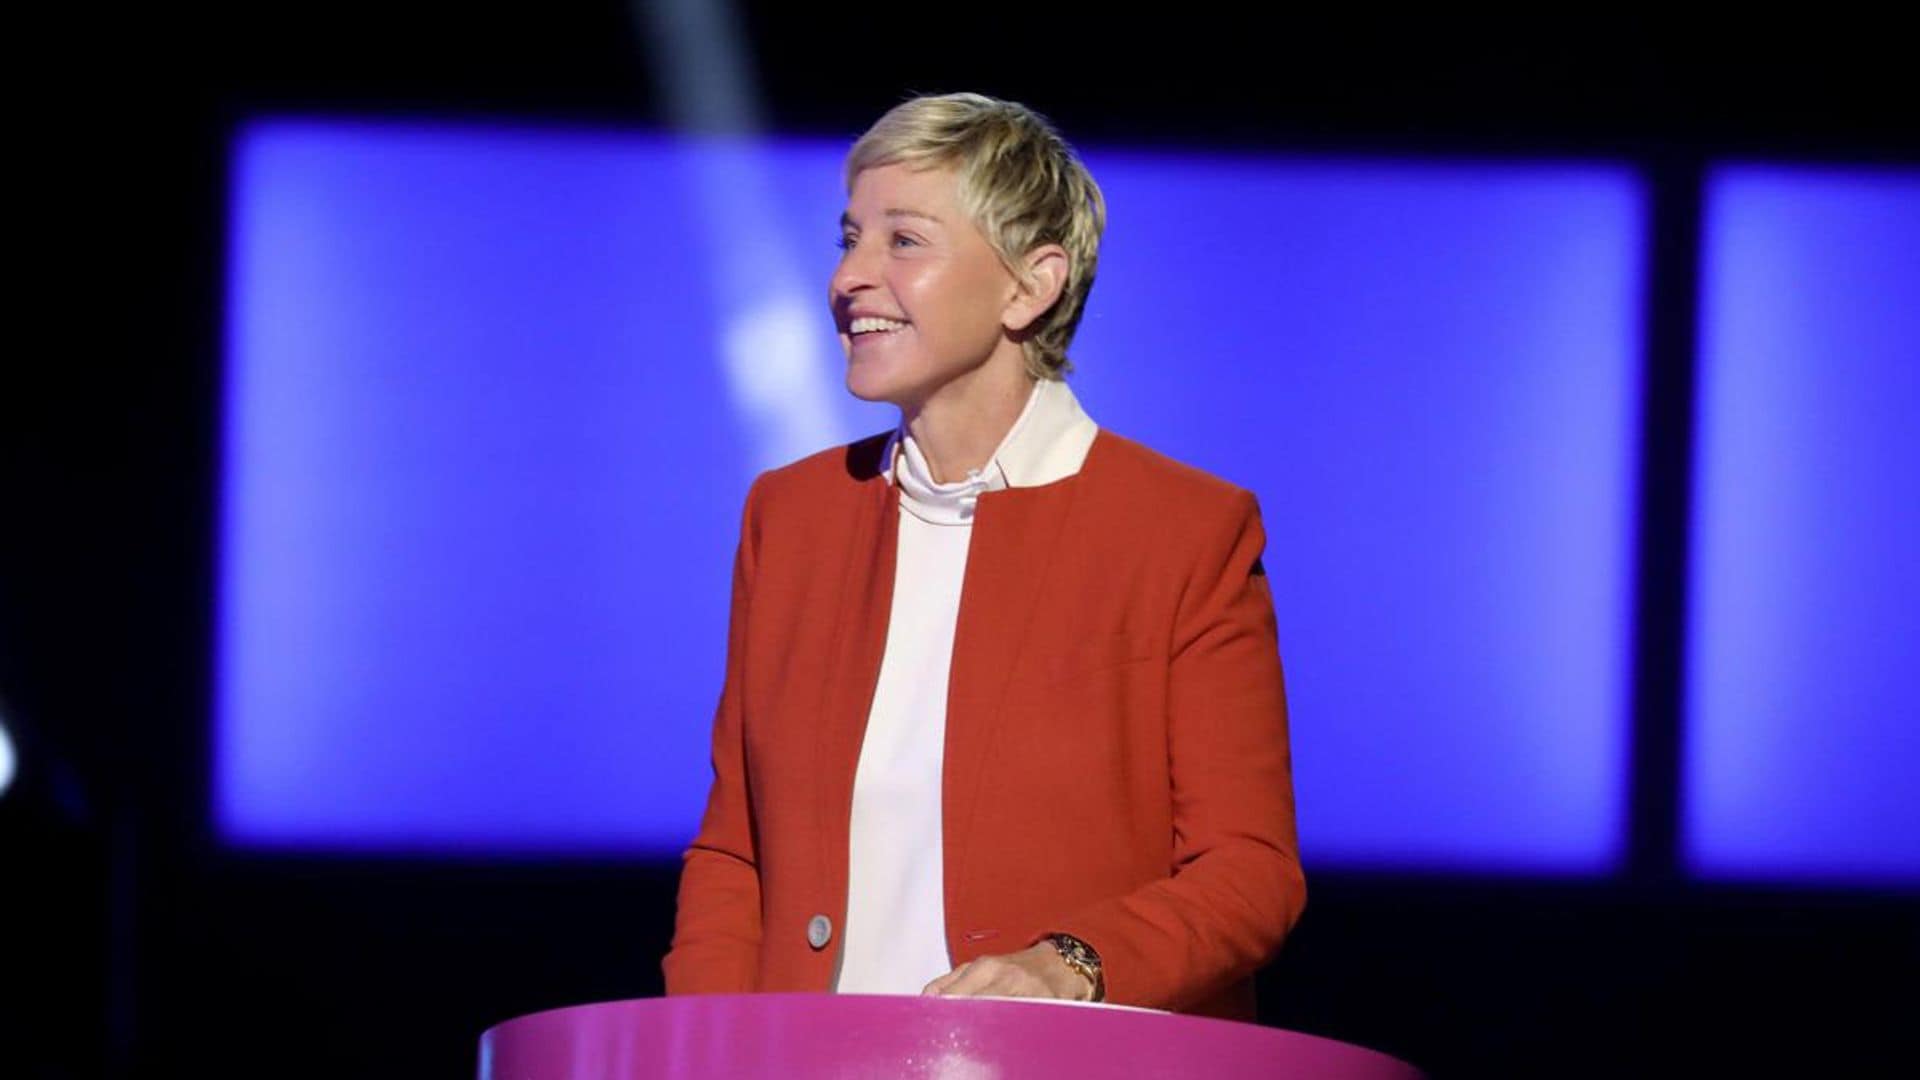 ‘The Ellen DeGeneres’ show will soon air its last episode — here’s all we know